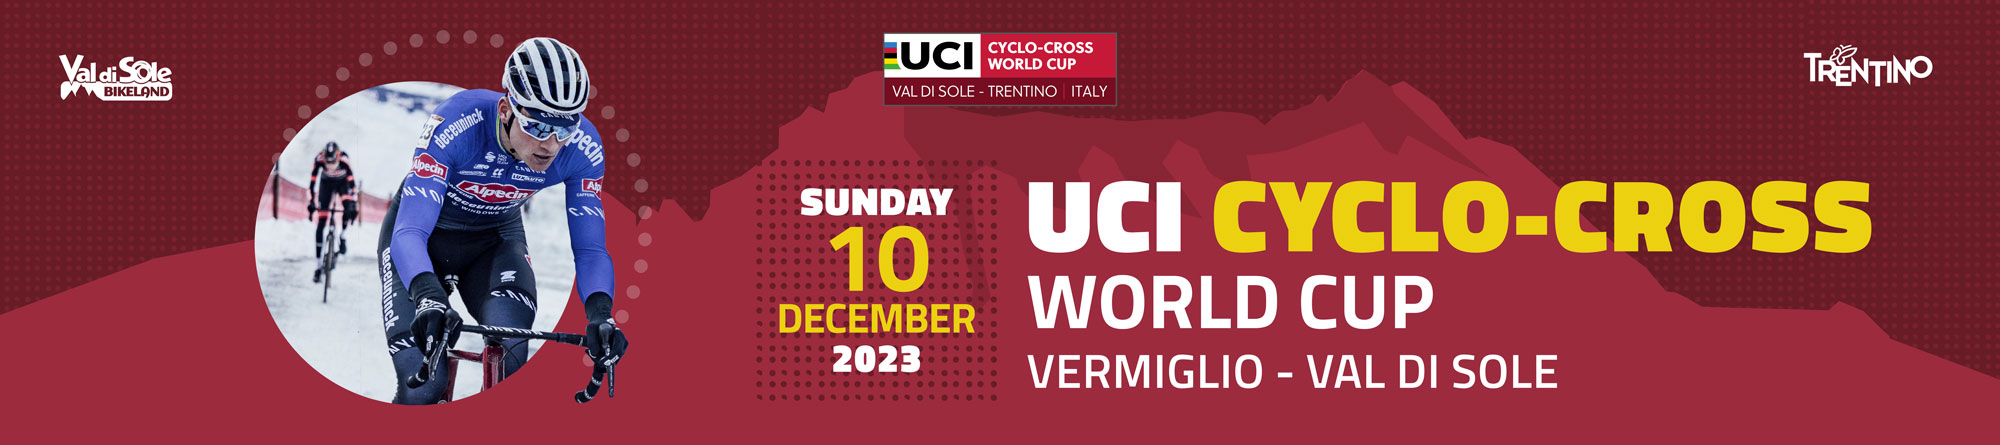 Press releases - Cyclo Cross World Cup 2023